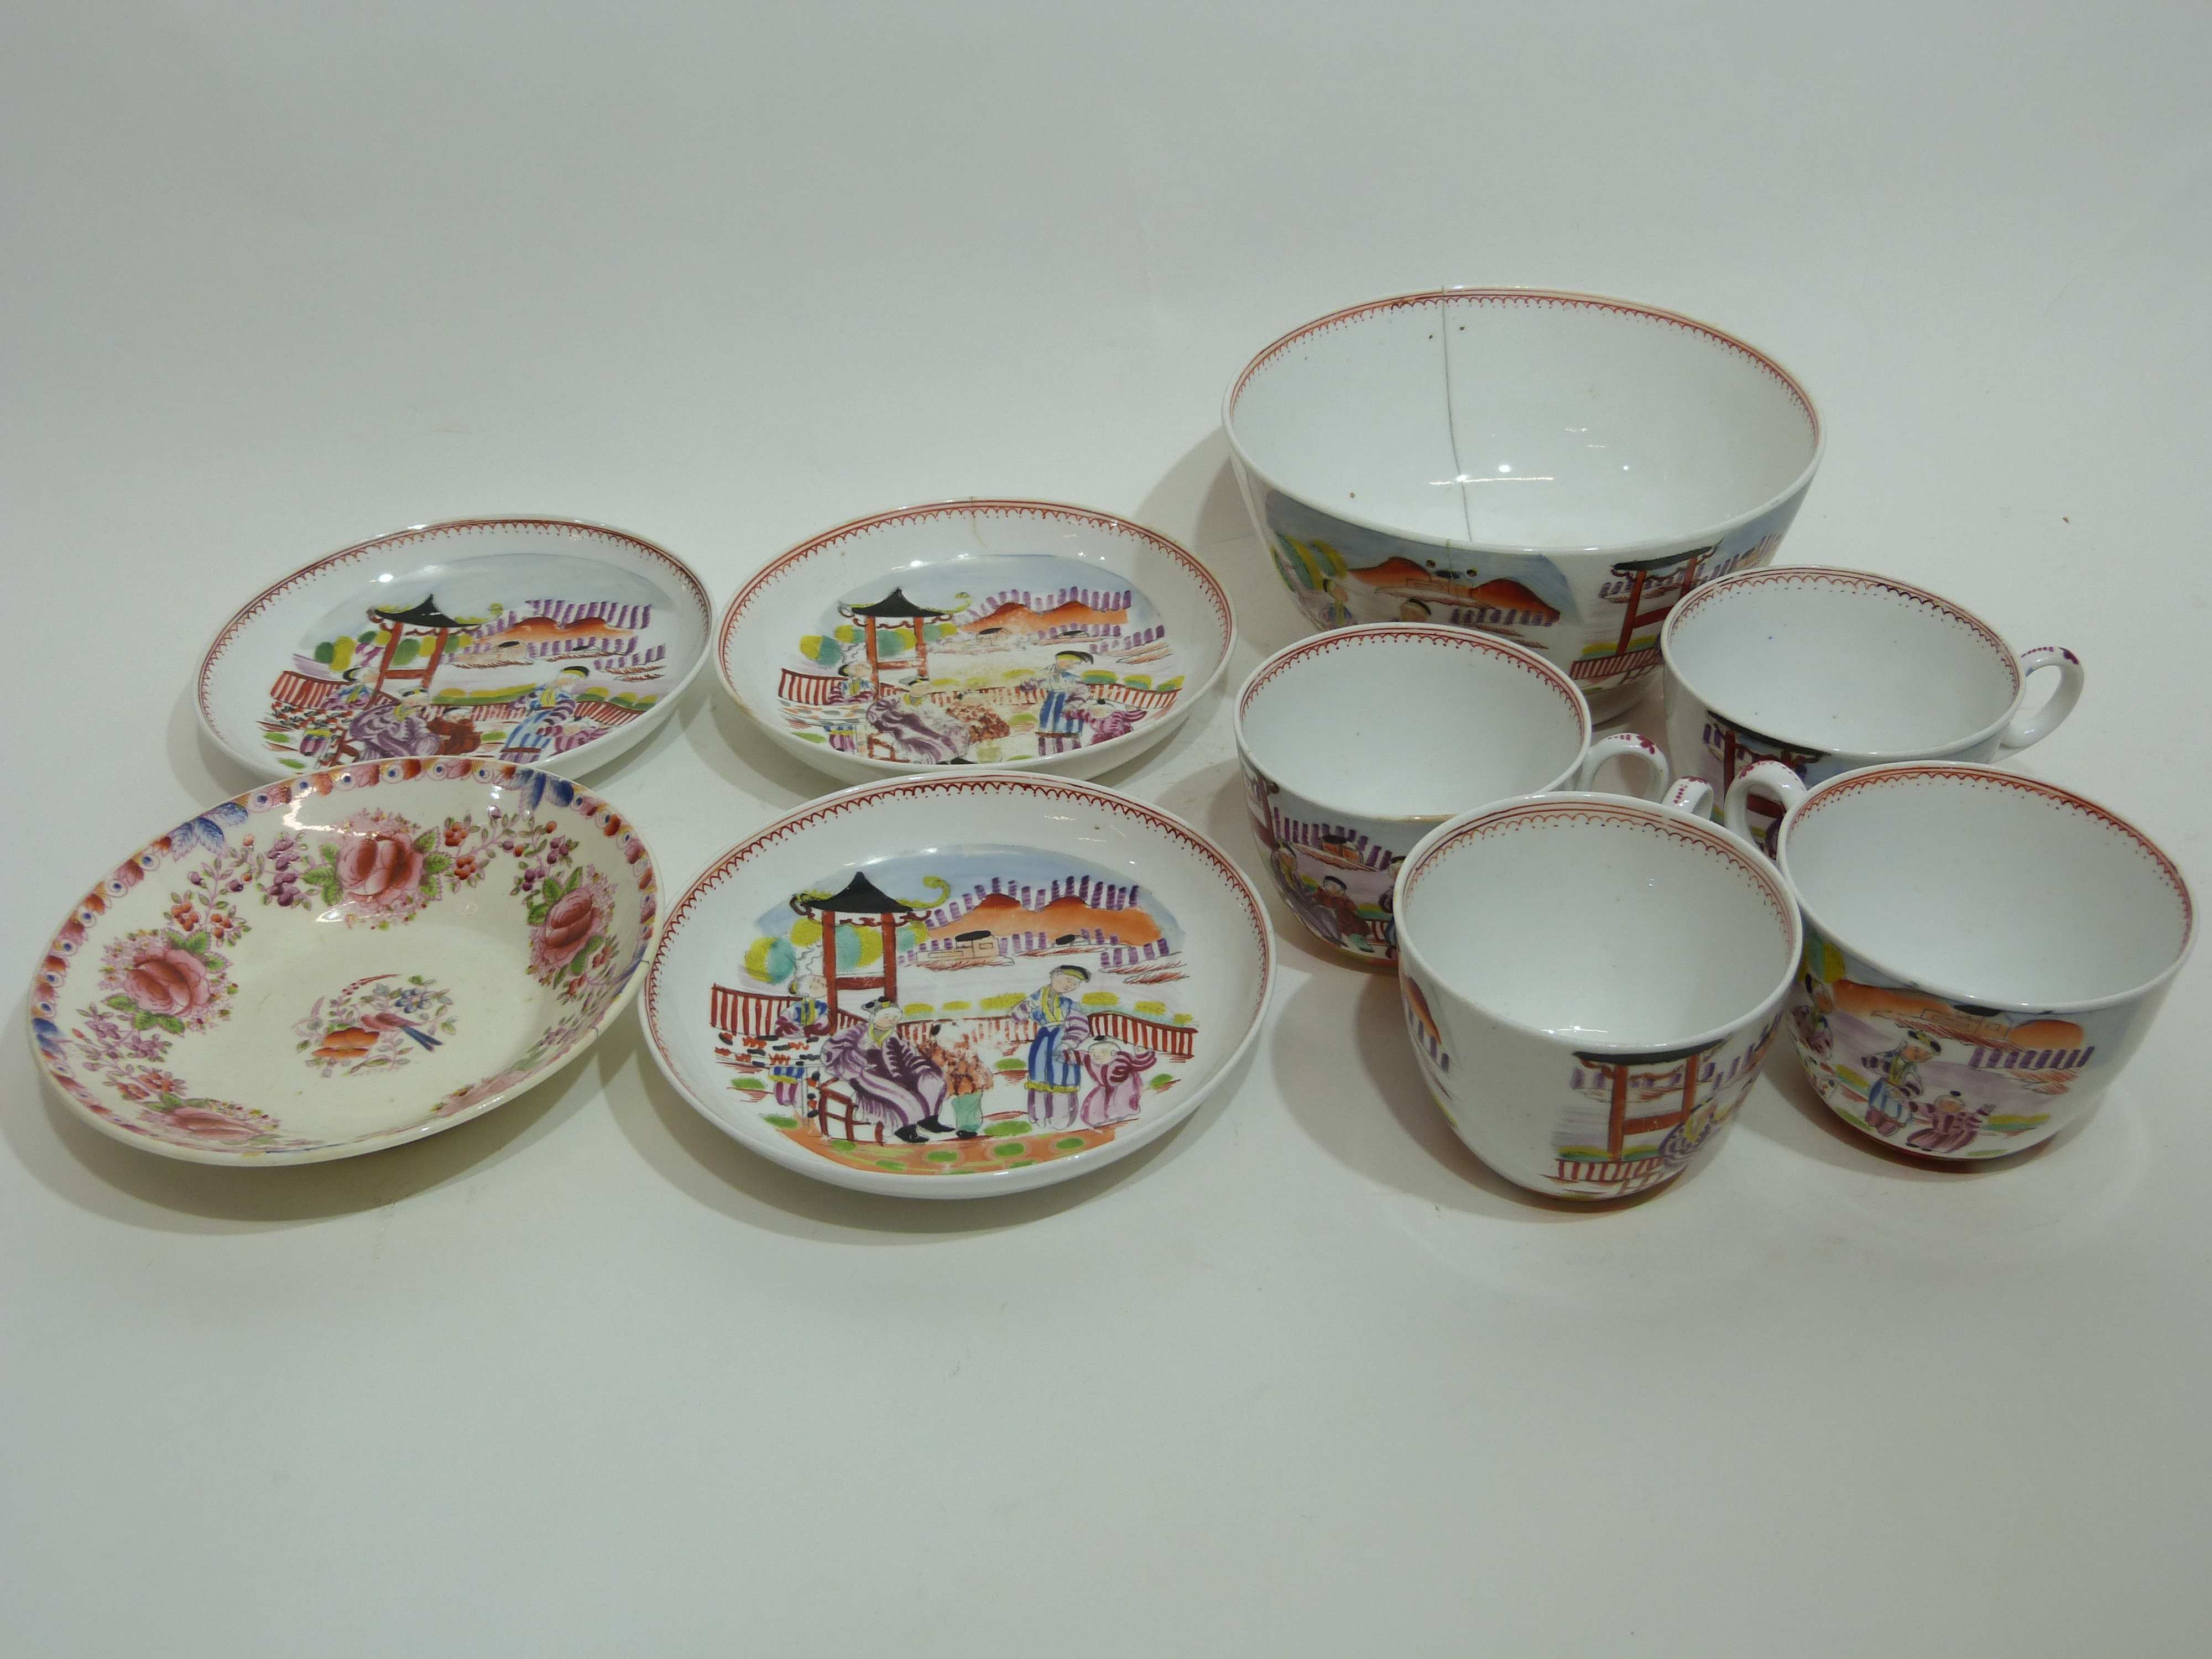 Group of late 18th century English porcelain wares decorated with Chinese figures, possibly